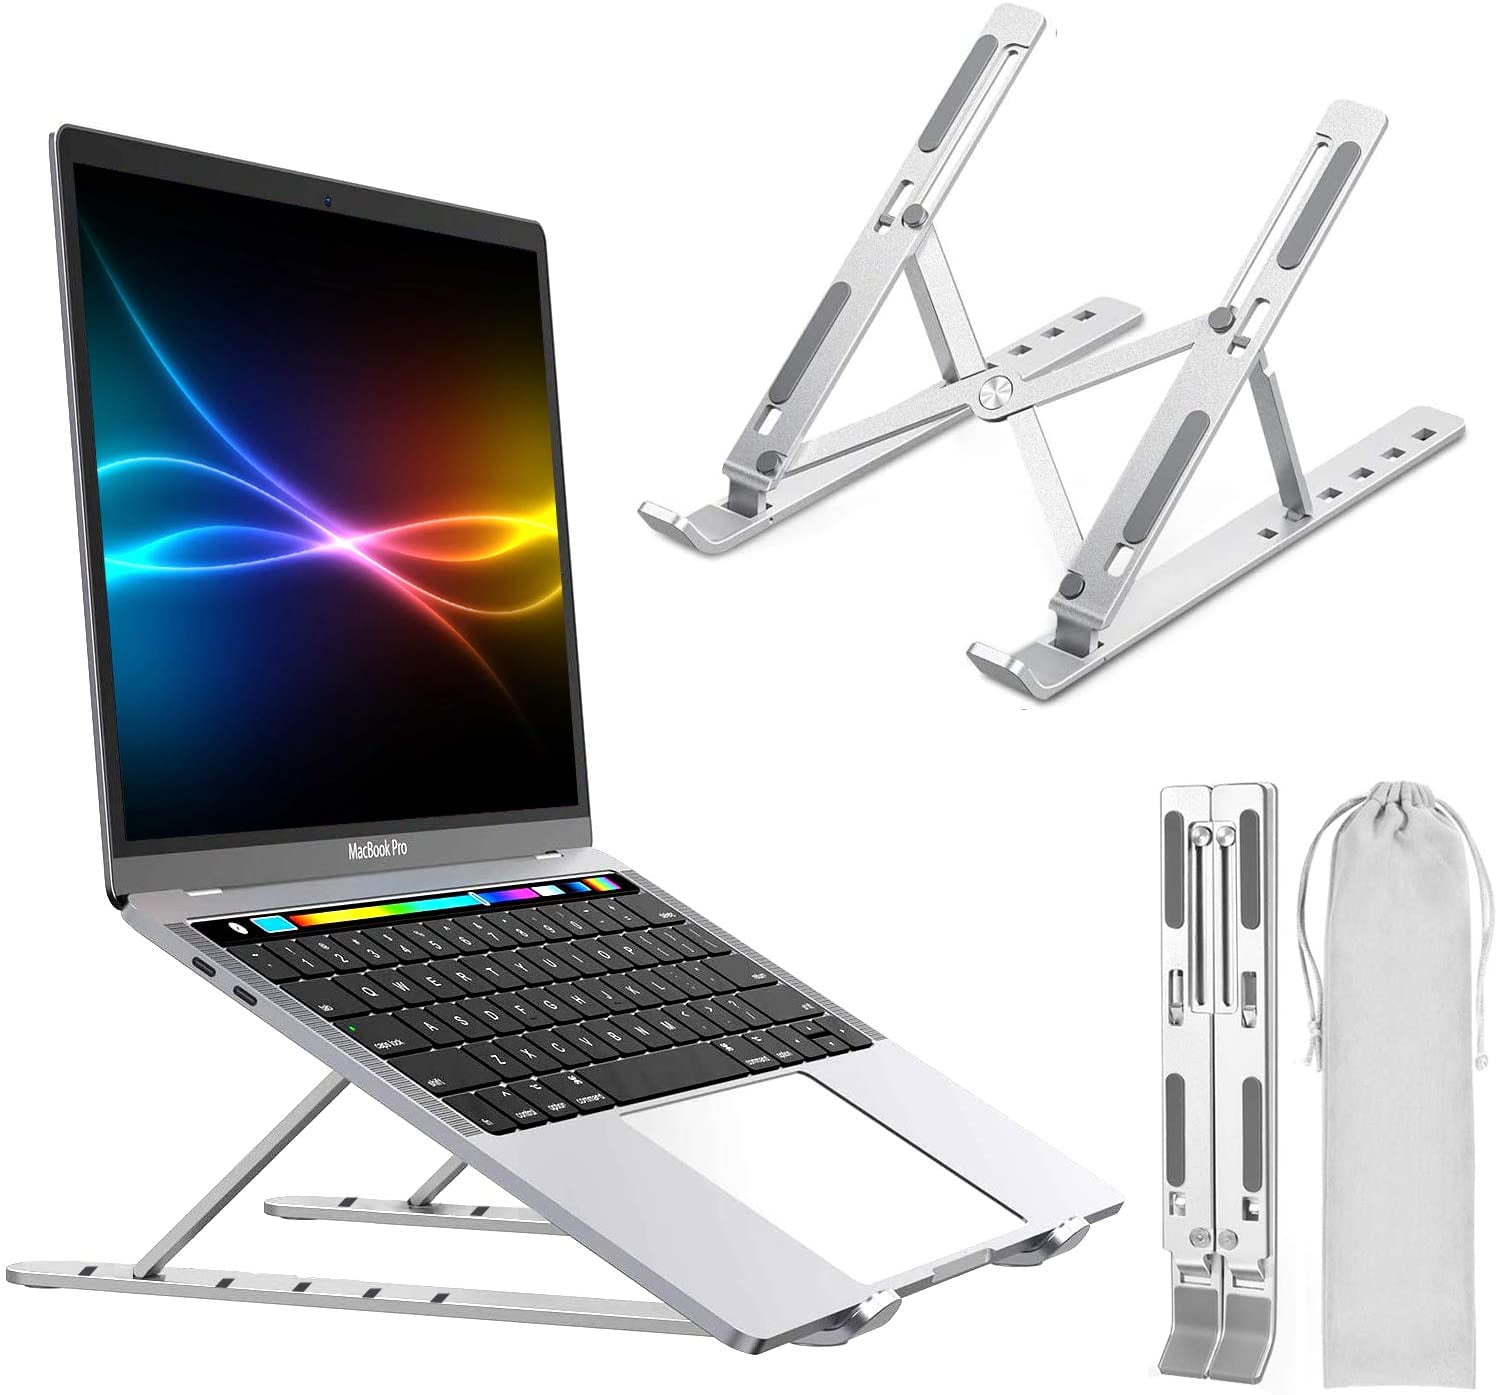 6 level Height adjustable Portable foldable laptop stand for Macbook/tablet/iPad 